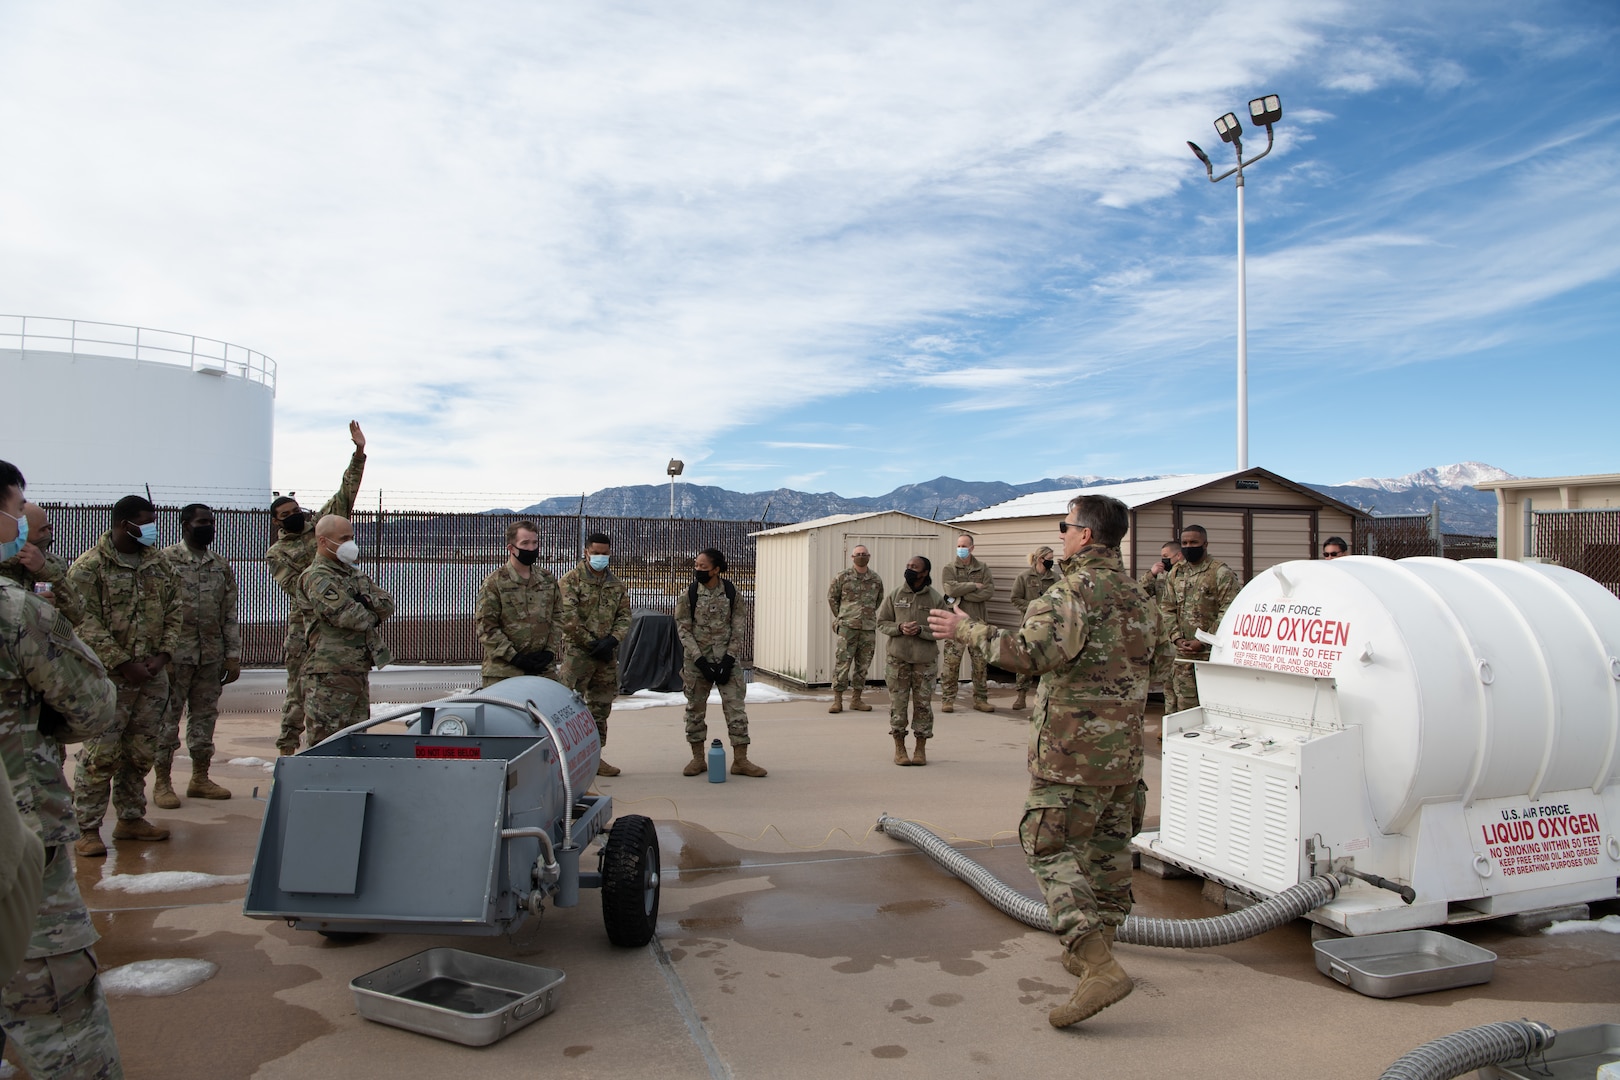 An Airmen speaks to a small group of soldiers in front of a large white container labeled "LIQUID OXYGEN" and a gray container beside him.